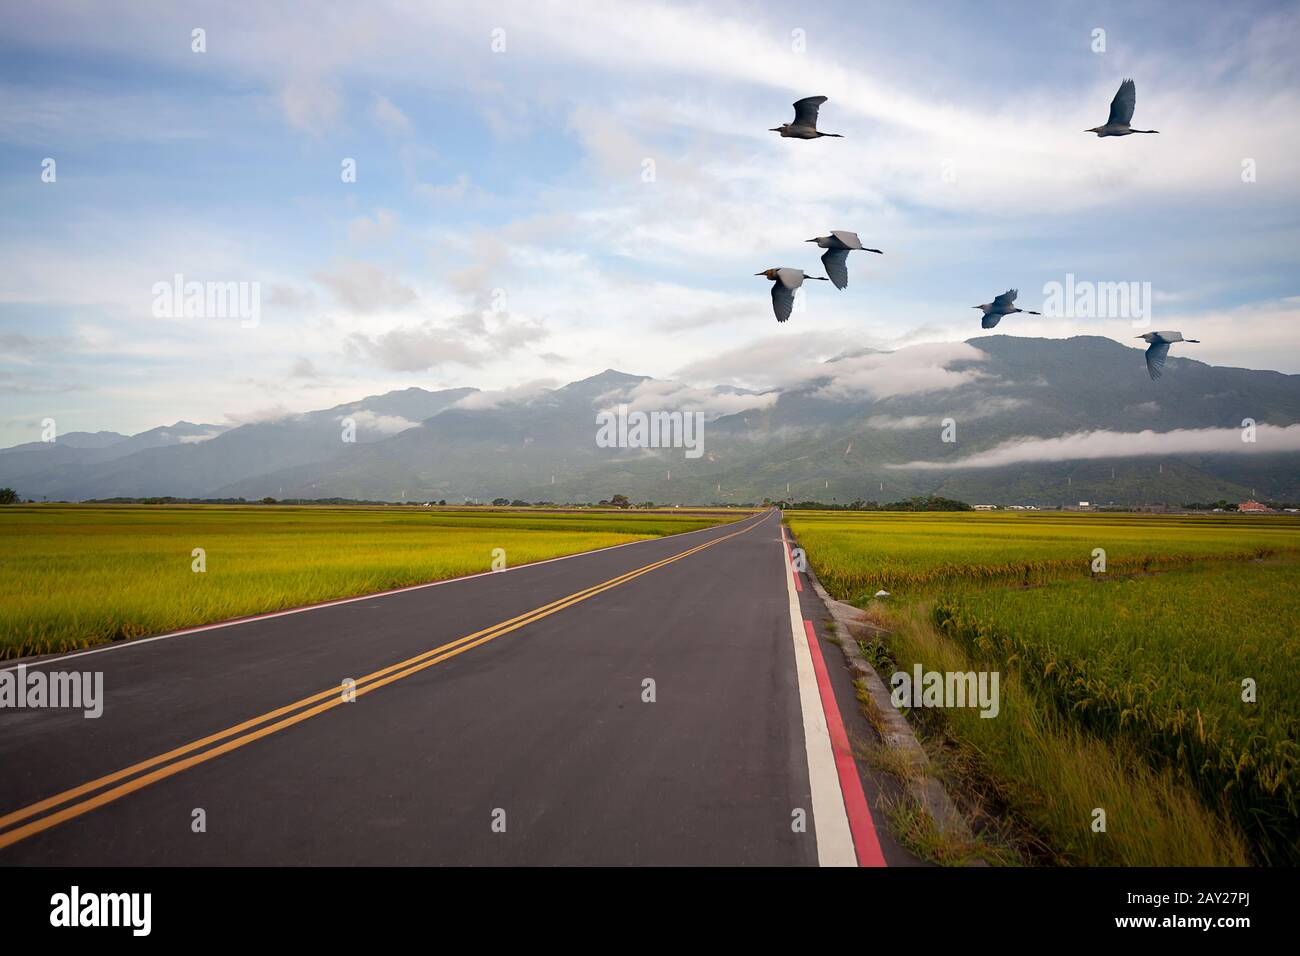 The Foggy morning in the mountains with flying birds over silhouettes of hills Stock Photo